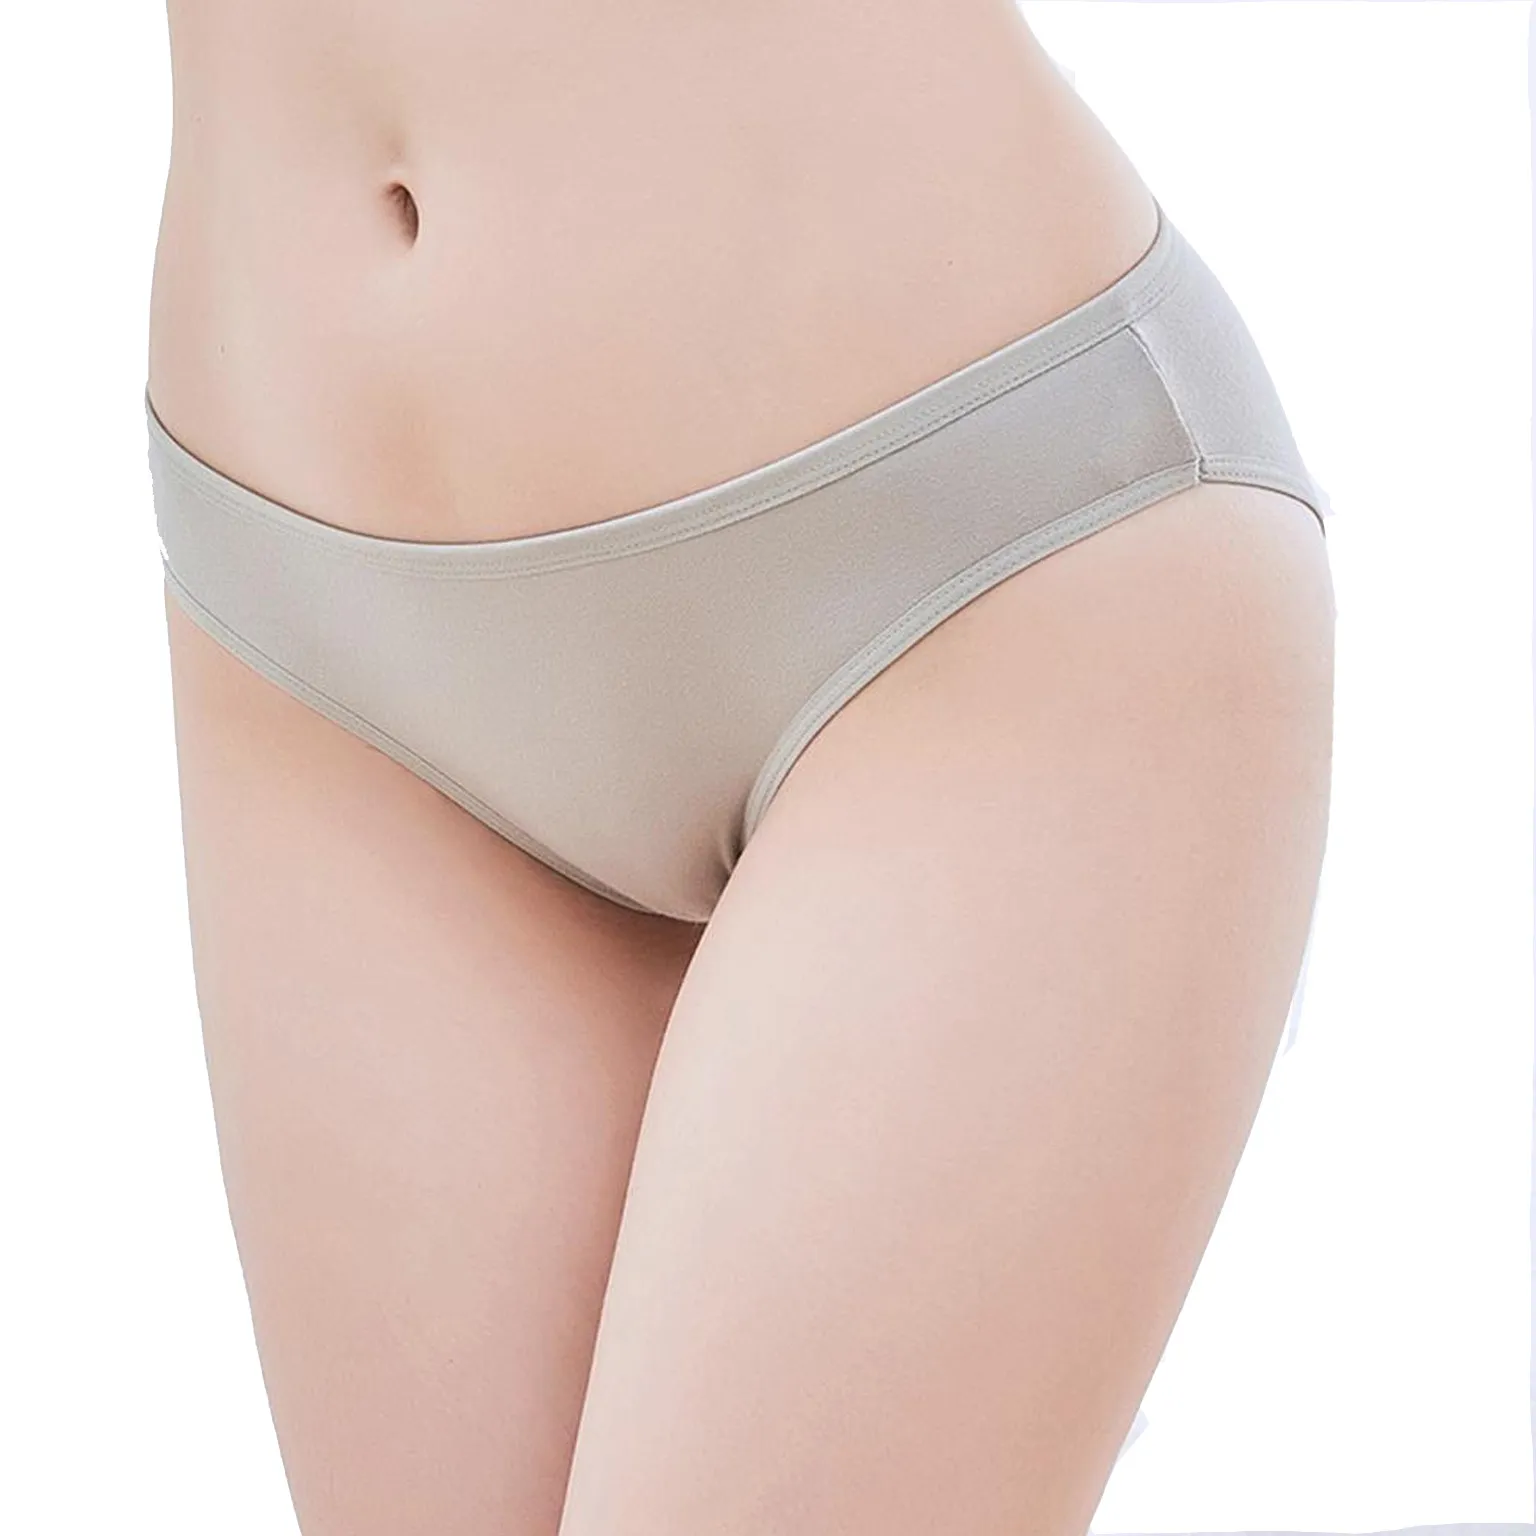 Low Waist Panty Manufacturing ecofriendly material